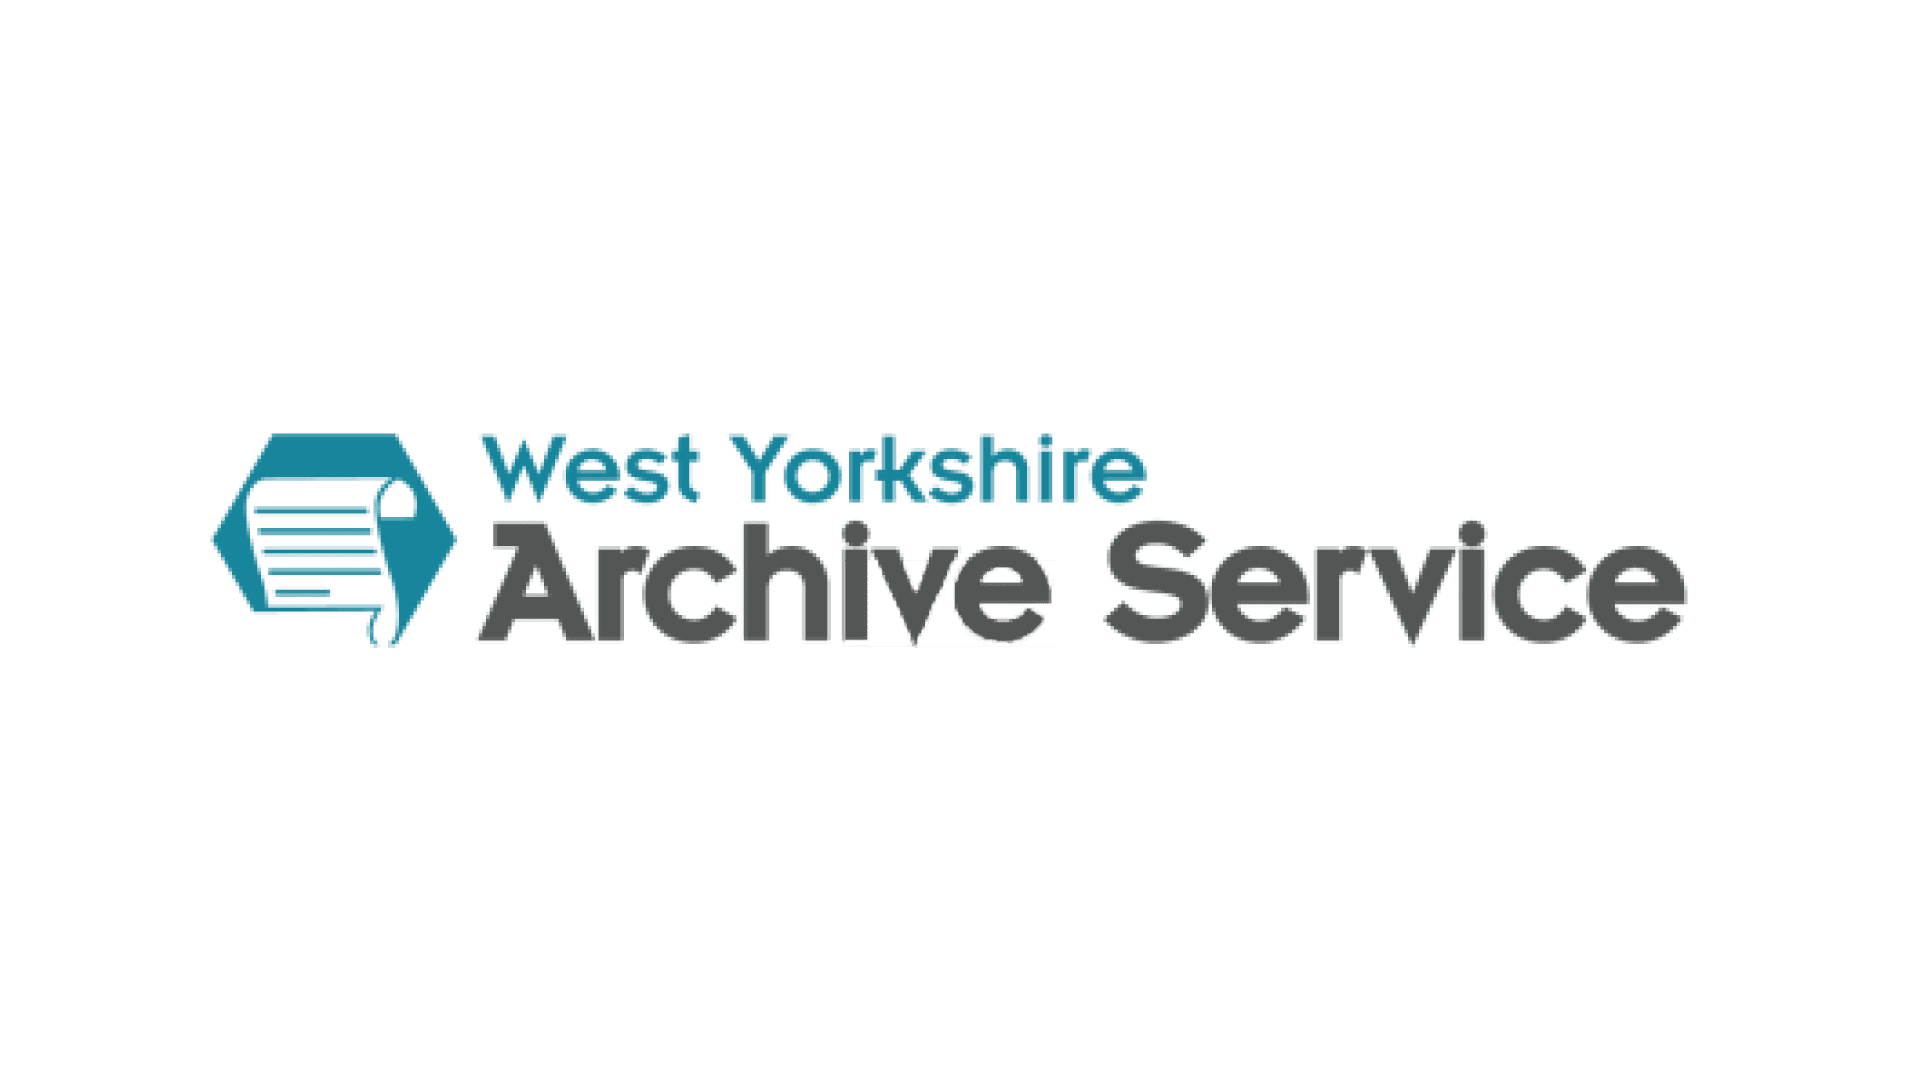 West Yorkshire Archive Service works with CADS